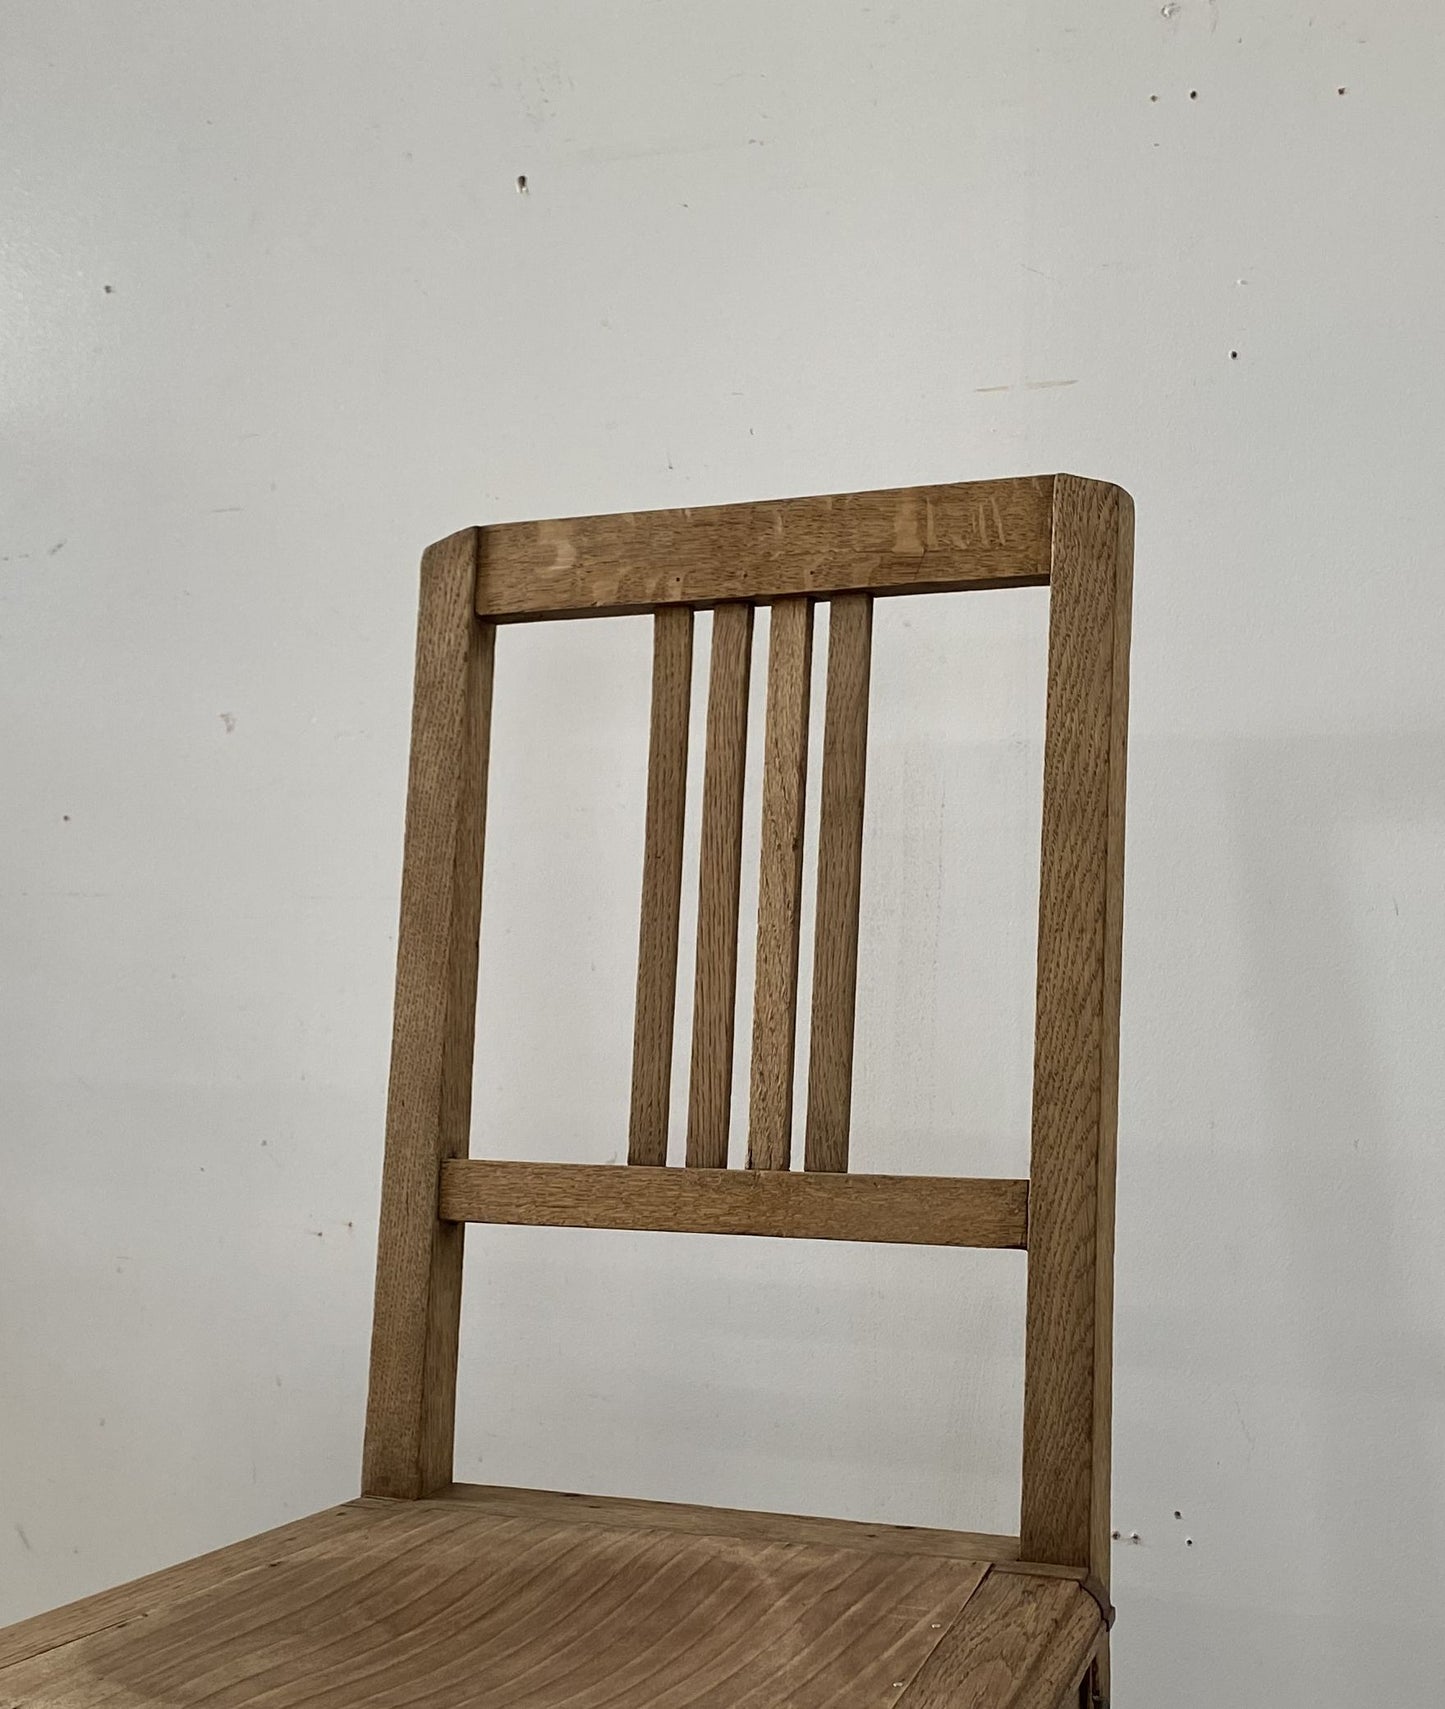 French Chair